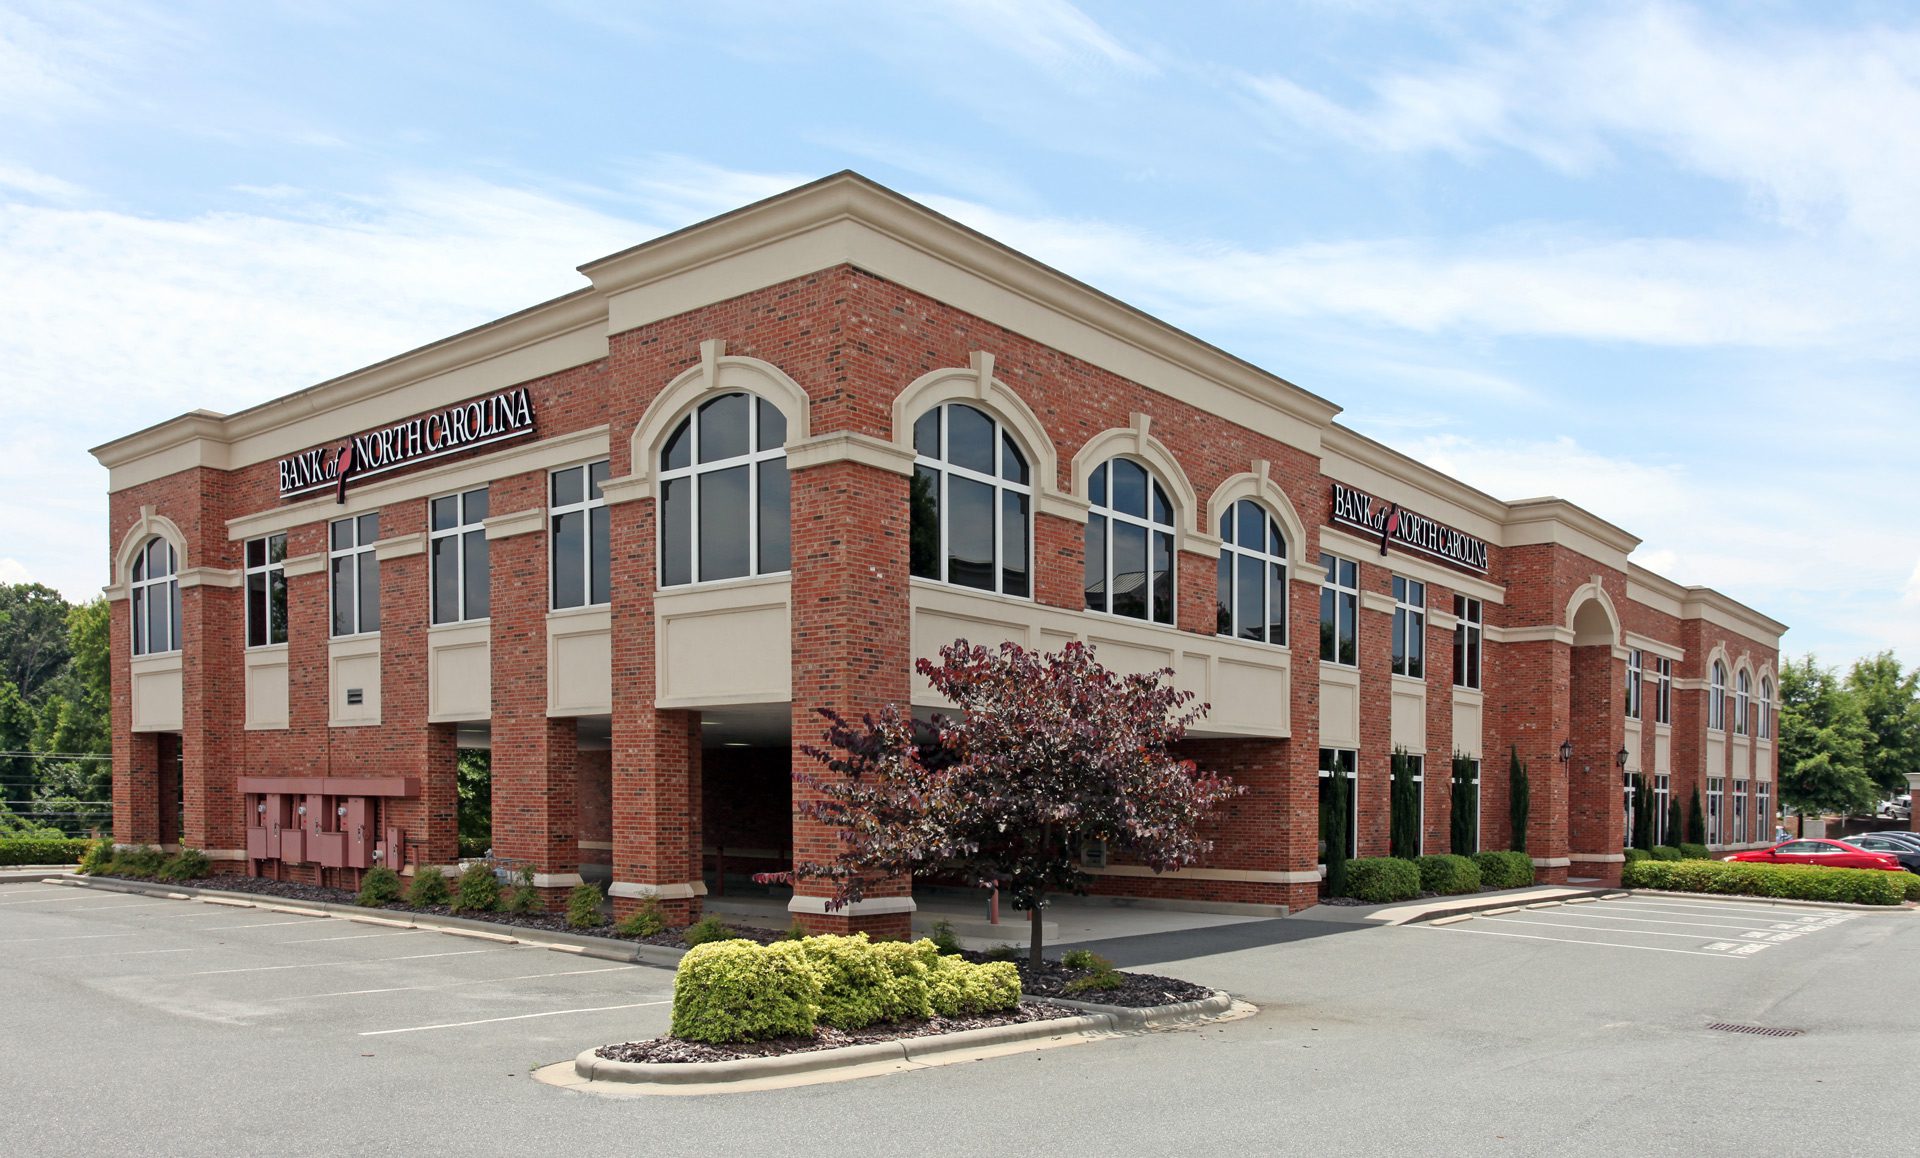 Mooresville-Gateway-Bank-of-NC brick building exterior during daytime